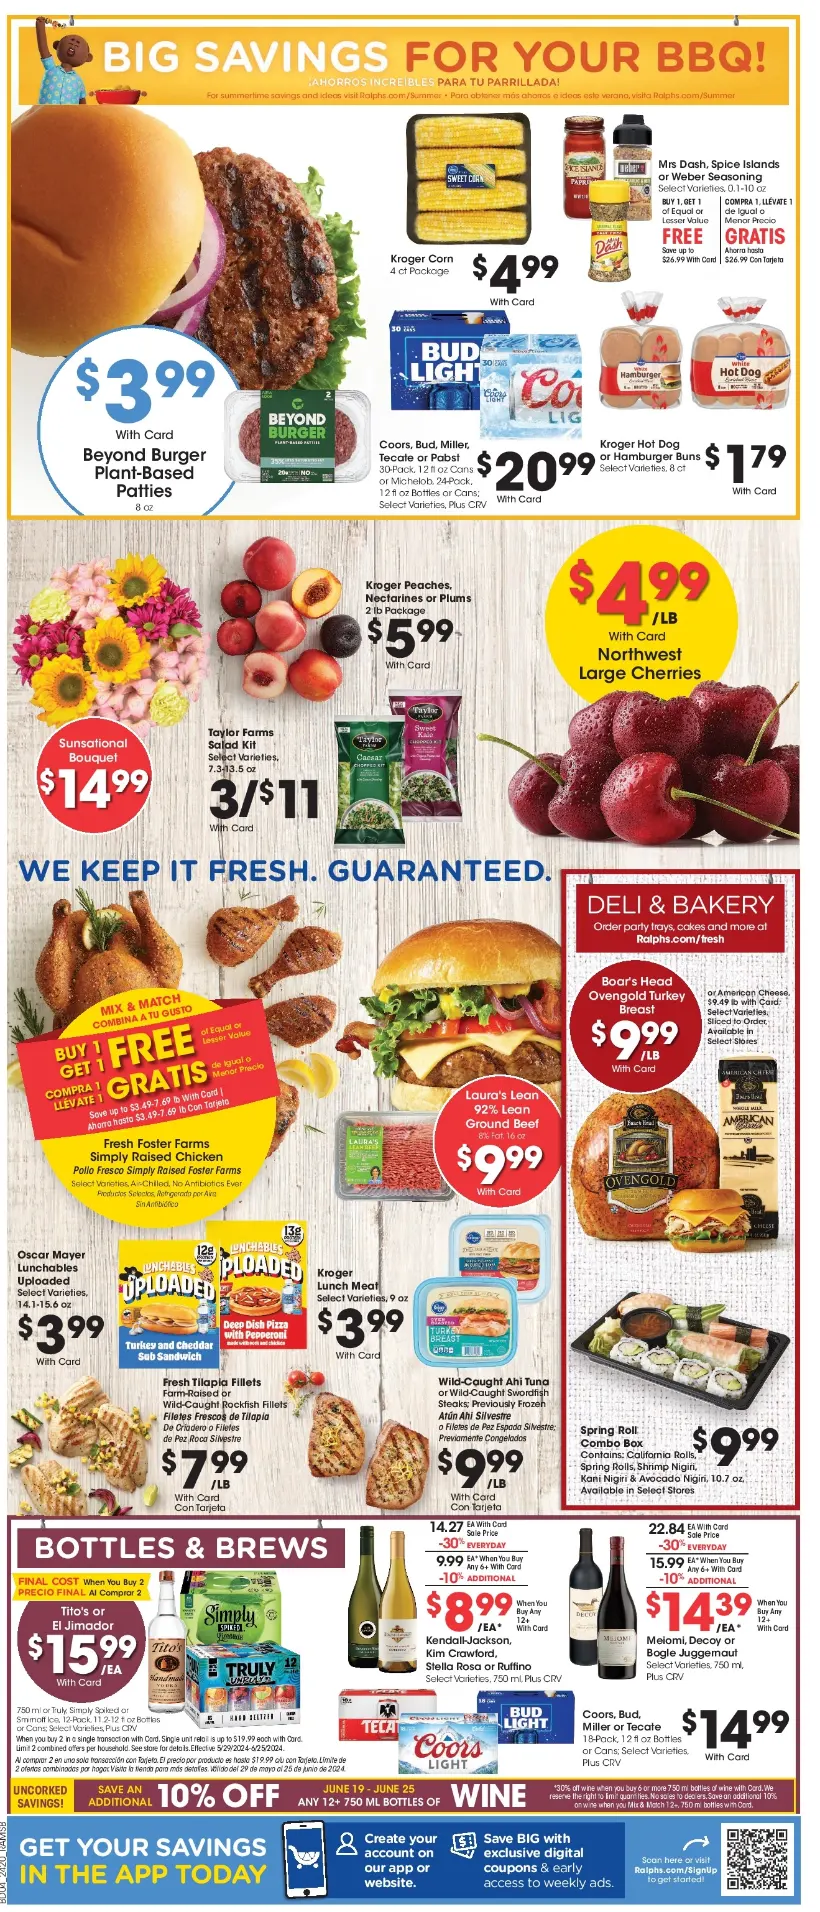 Ralphs July 2024 Weekly Sales, Deals, Discounts and Digital Coupons.